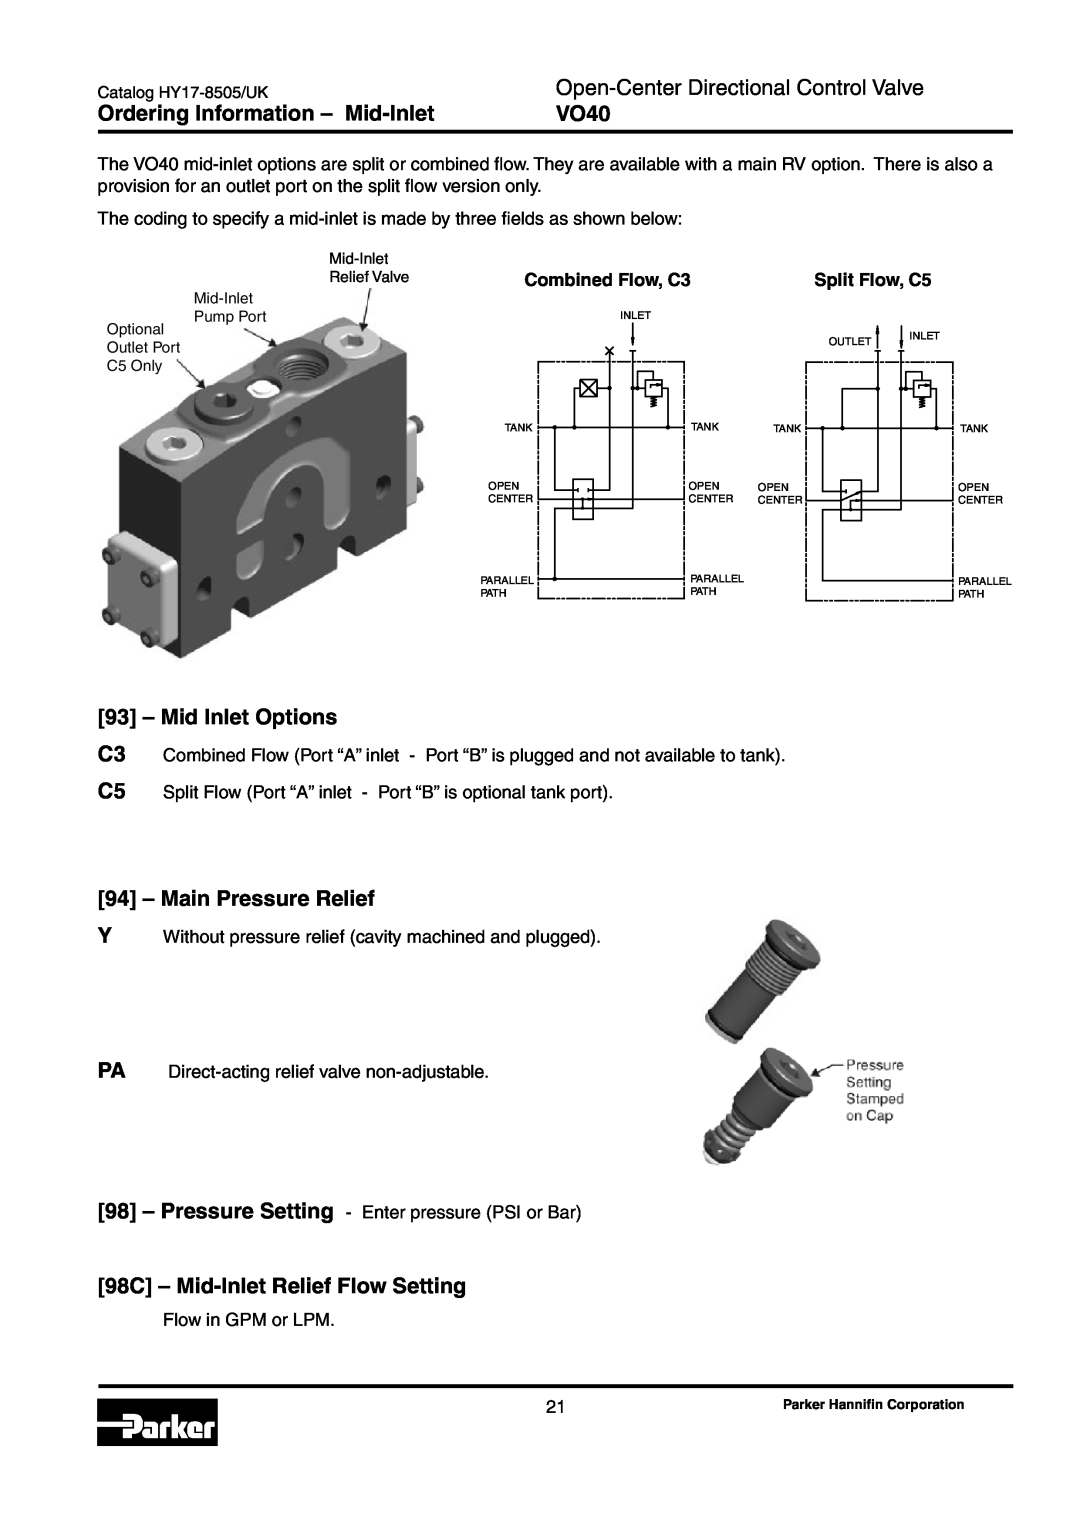 Parker Hannifin VO40 manual Ordering Information - Mid-Inlet, Mid Inlet Options, Main Pressure Relief 